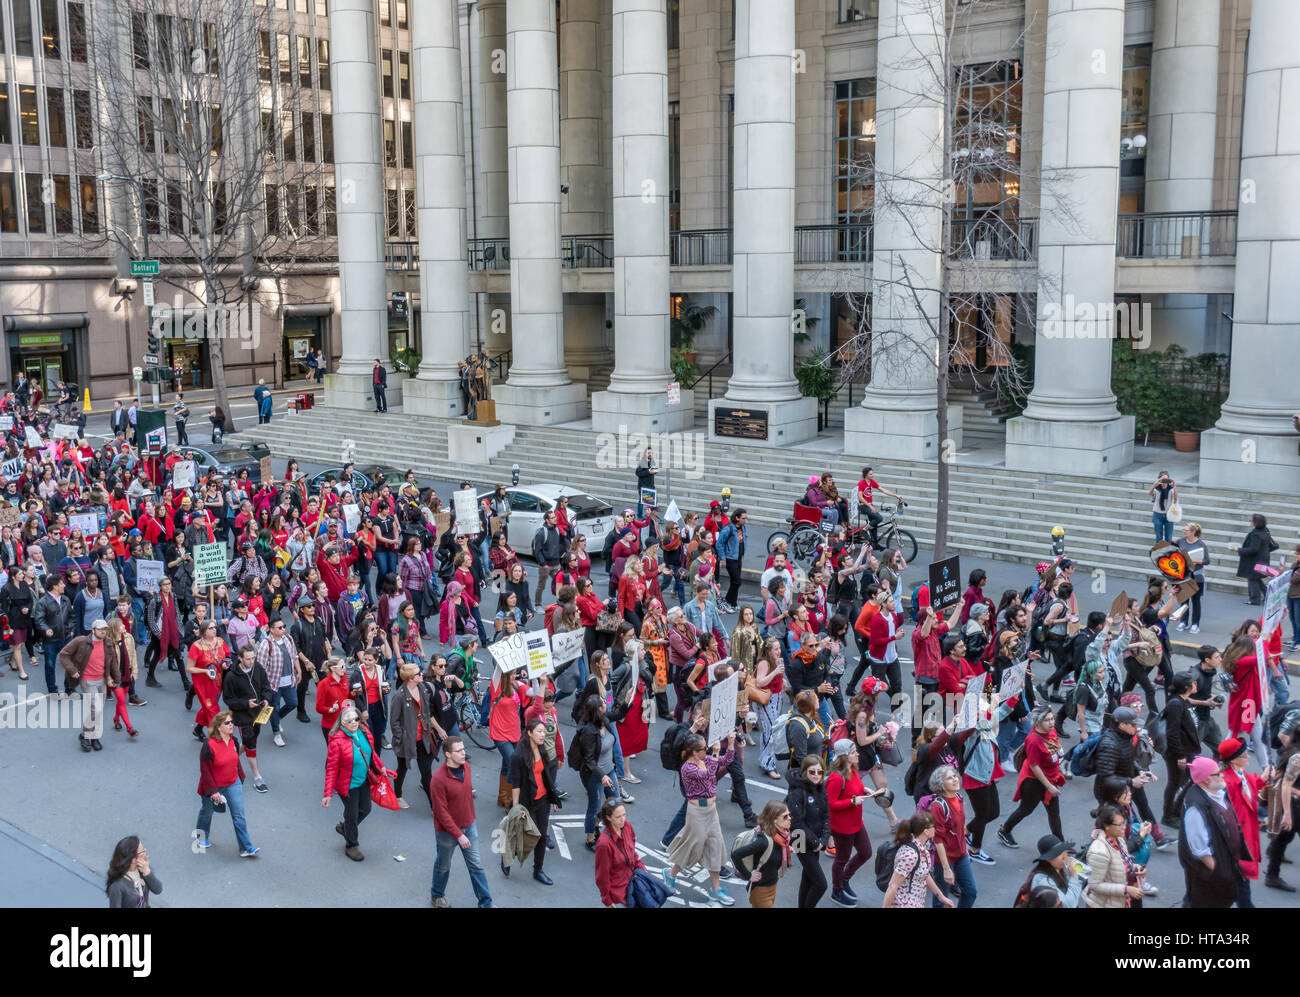 San Francisco, USA. 8th Mar, 2017. Demonstrators march past the old Federal Reserve building toward San Francisco ICE headquarters to protest Trump's deportation of undocumented immigrants after a rally on International Women's Day. Many demonstrators wore red to show support for the 'Day without a Woman' strike. Credit: Shelly Rivoli/Alamy Live News Stock Photo